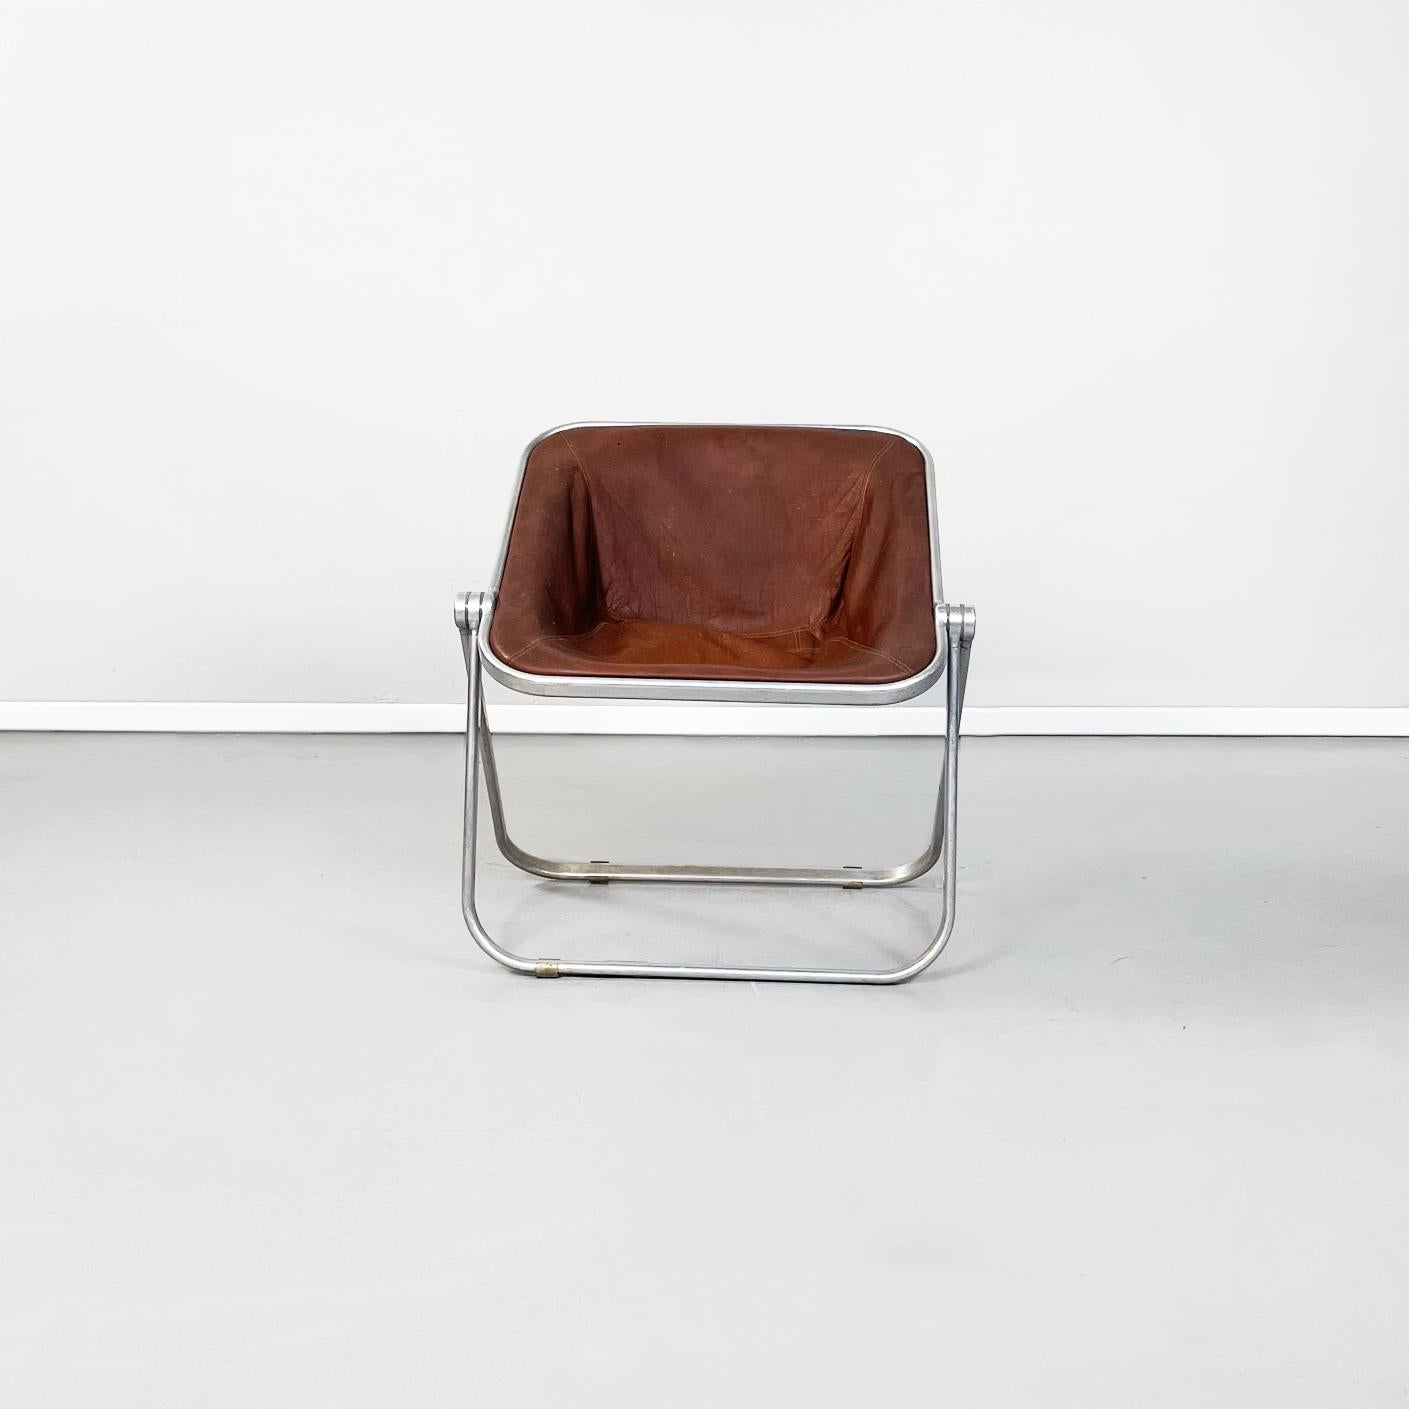 Italian mid-century brown leather armchair Plona by Piretti for Anonima Castelli, 1970s
Armchair model Plona with chromed oval aluminum tube structure and original brown leather seat.
Produced by Anonima Castelli in 1970s and designed by Giancarlo